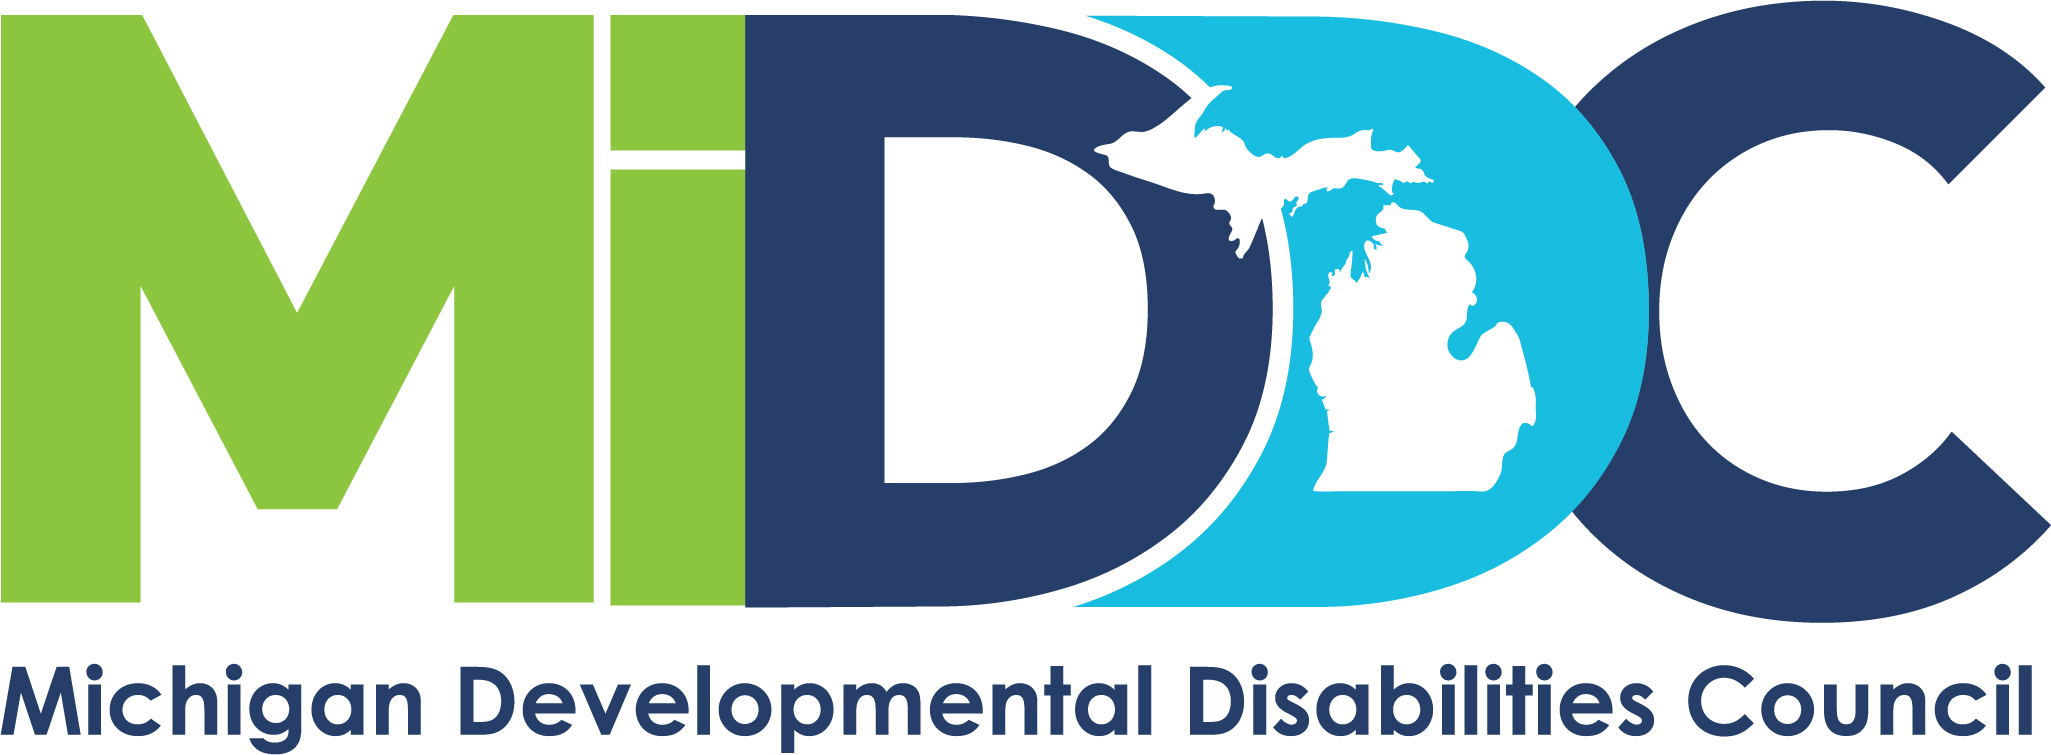 The letters M i D D C are in different colors with an outline of the state of Michigan place over the top of the second letter D. the words Michigan Developmental Disabilities Council are underneath the letters.